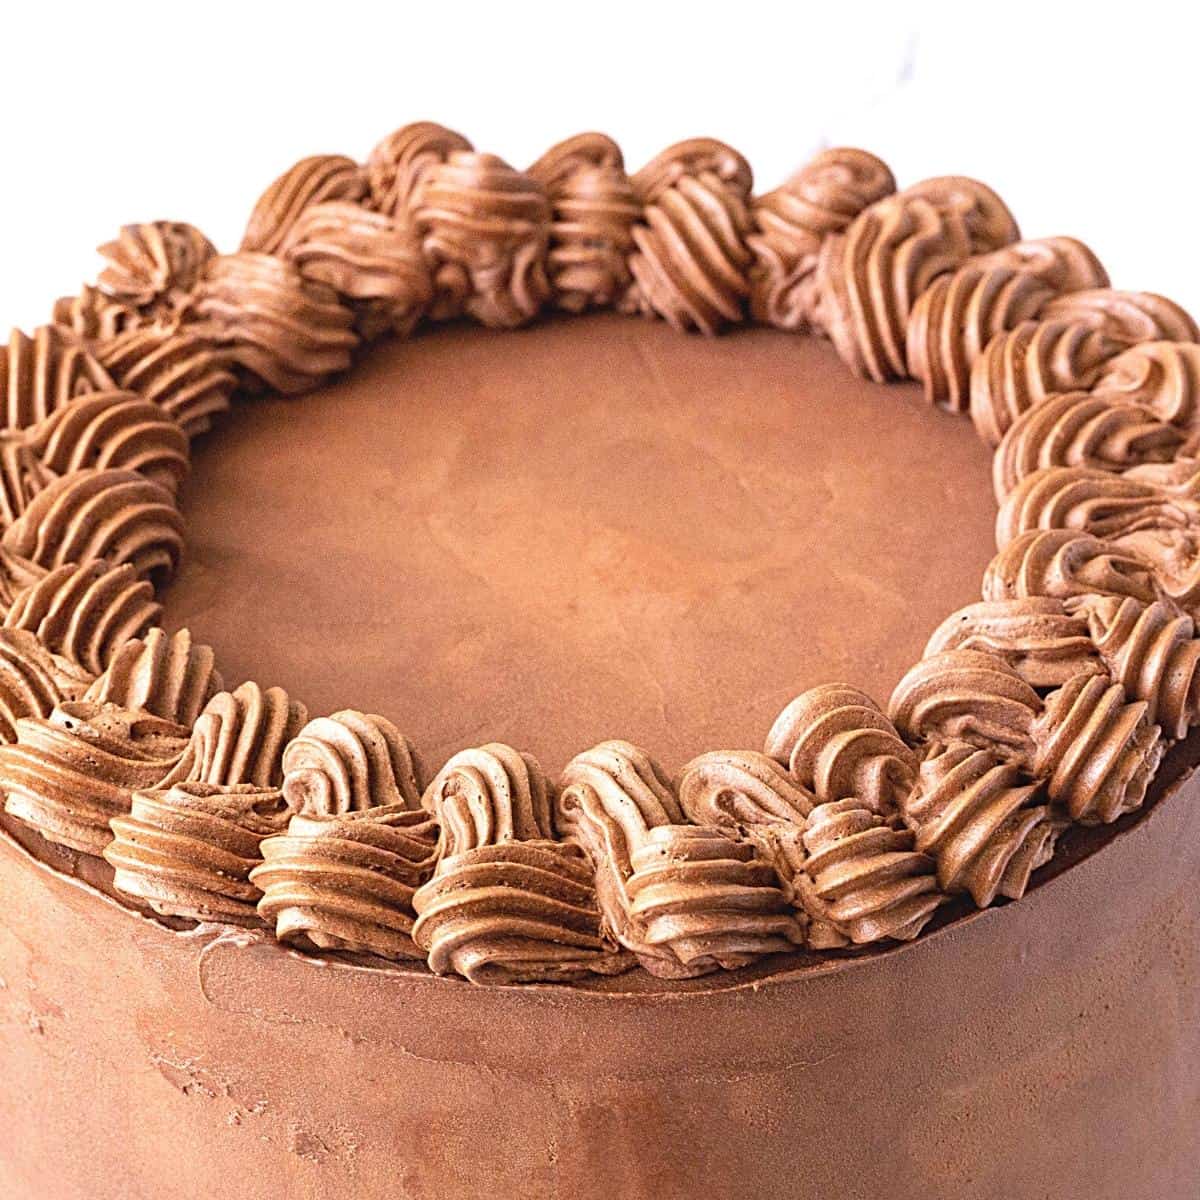 A cake frosted with ganache.